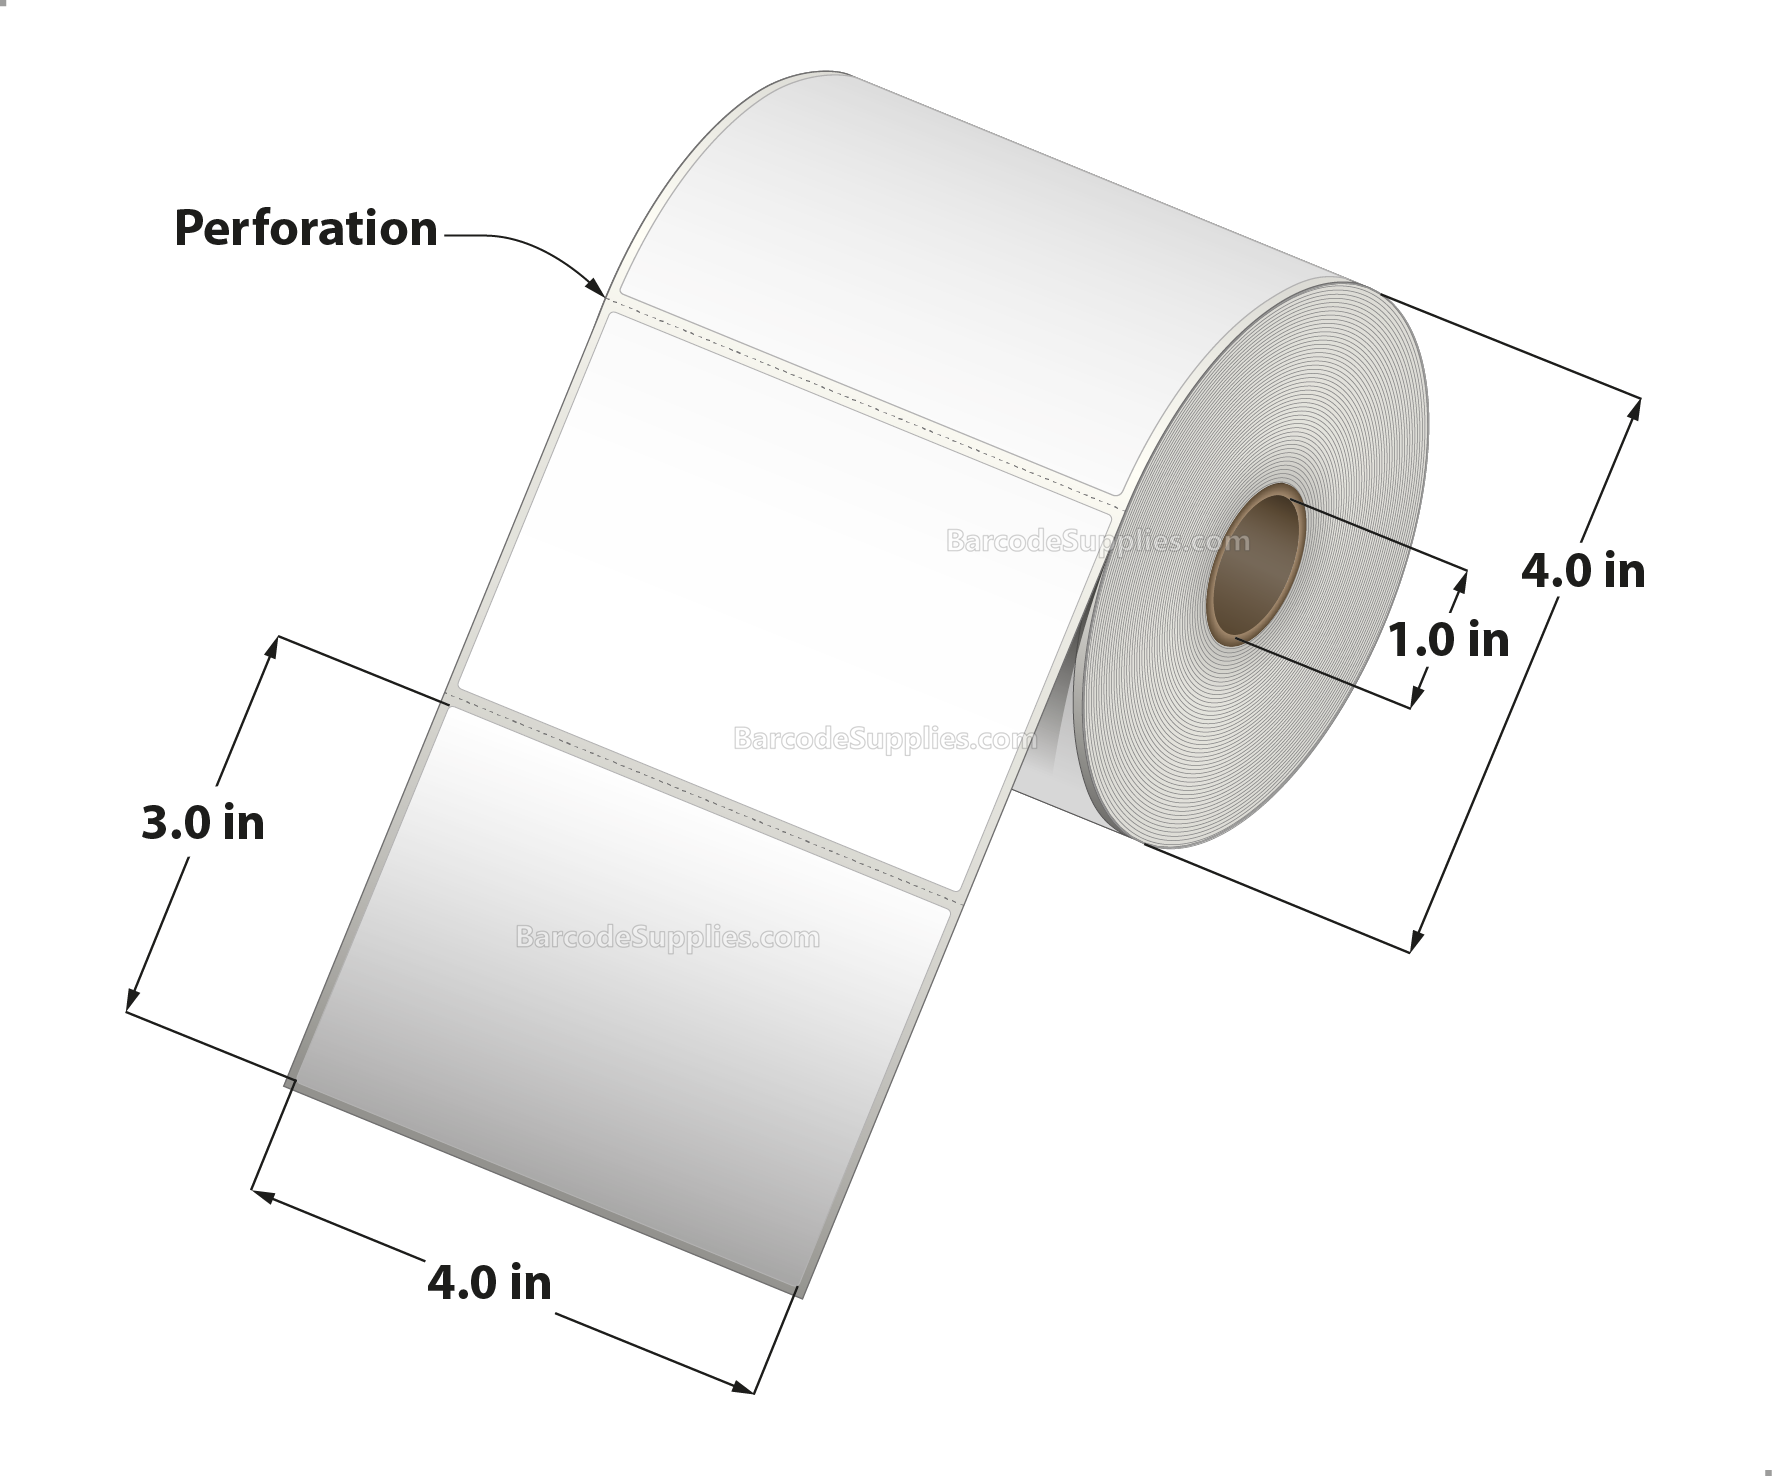 4 x 3 Thermal Transfer White Labels With Rubber Adhesive - Perforated - 500 Labels Per Roll - Carton Of 12 Rolls - 6000 Labels Total - MPN: RTT4-400300-1P